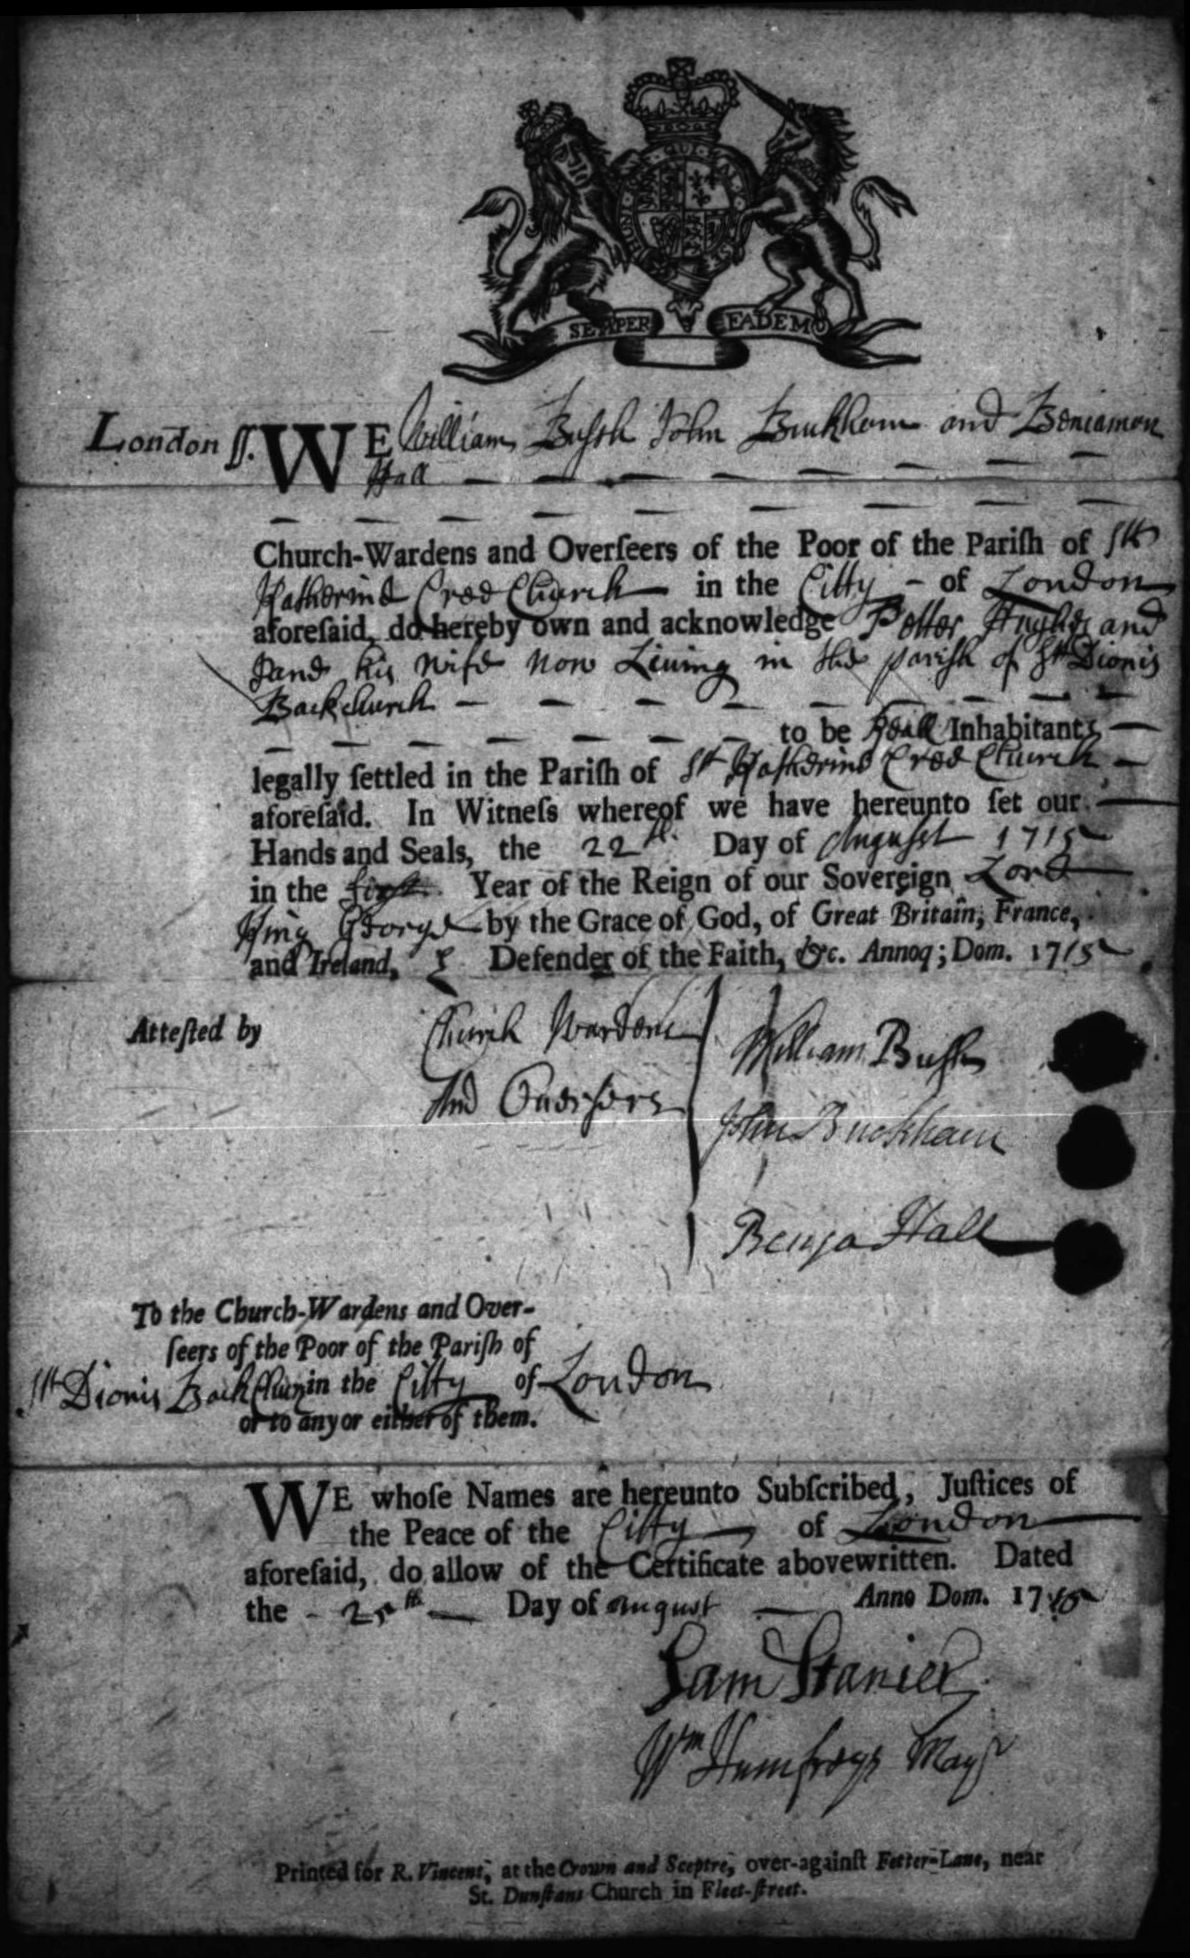 Figure 2.4 Printed settlement certificate filled out on behalf of Petter and Jane Hughes, 22 August 1715. [LL, St Dionis Backchurch Parish: Churchwardens Vouchers/Receipts, 28 March 1683 -- 15 October 1729 (GLDBPP307010160)](http://www.londonlives.org/browse.jsp?div=GLDBPP307010160).